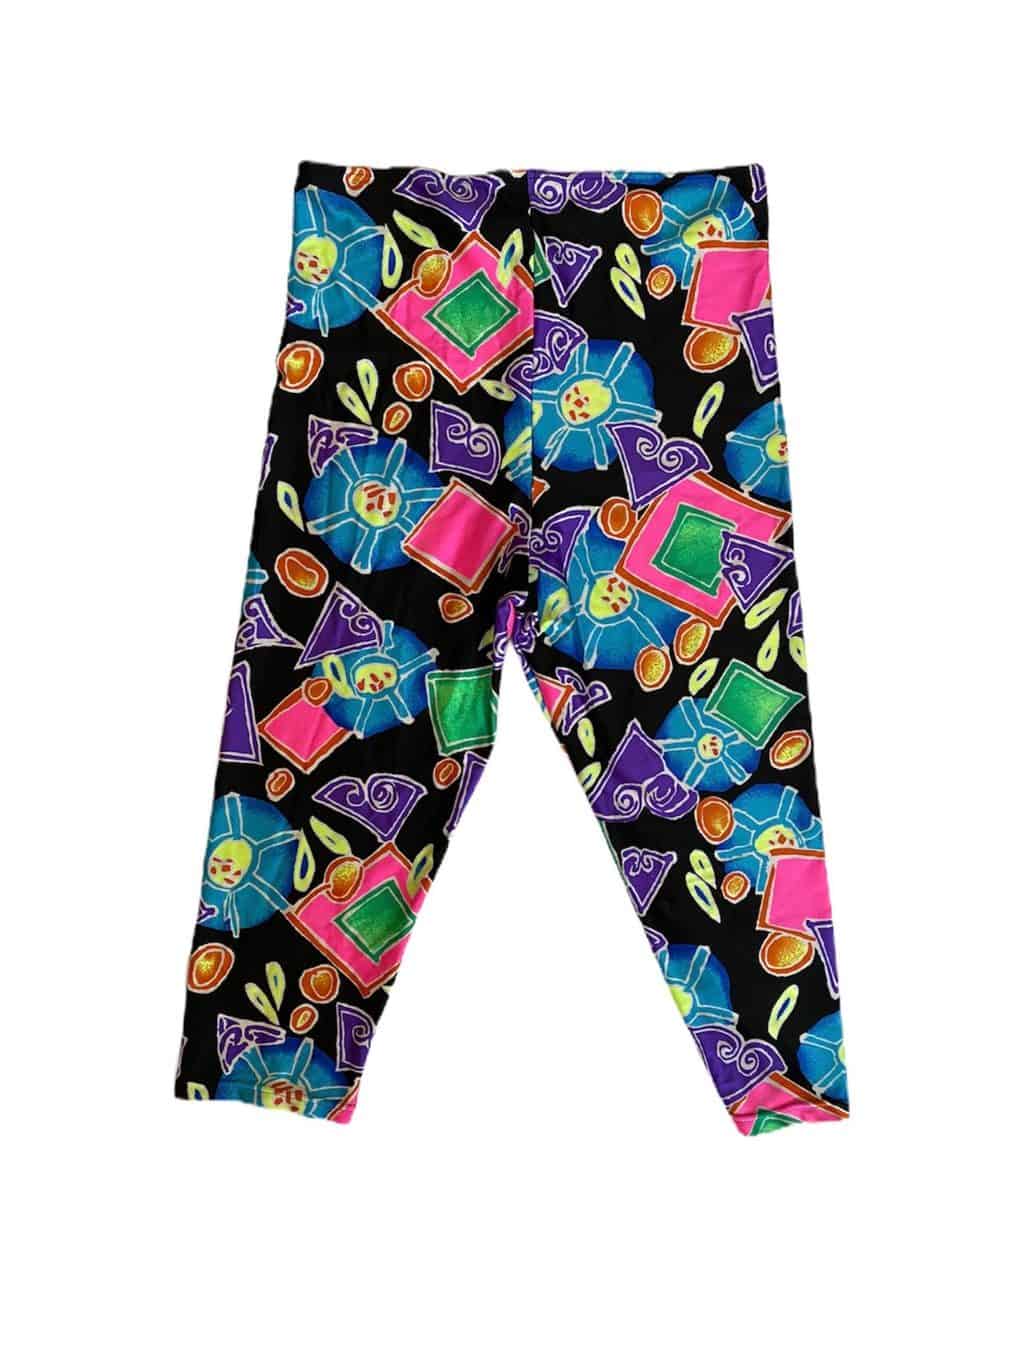 80s Bright Coloured Vintage Leggings by Sunflair - Small - St Cyr